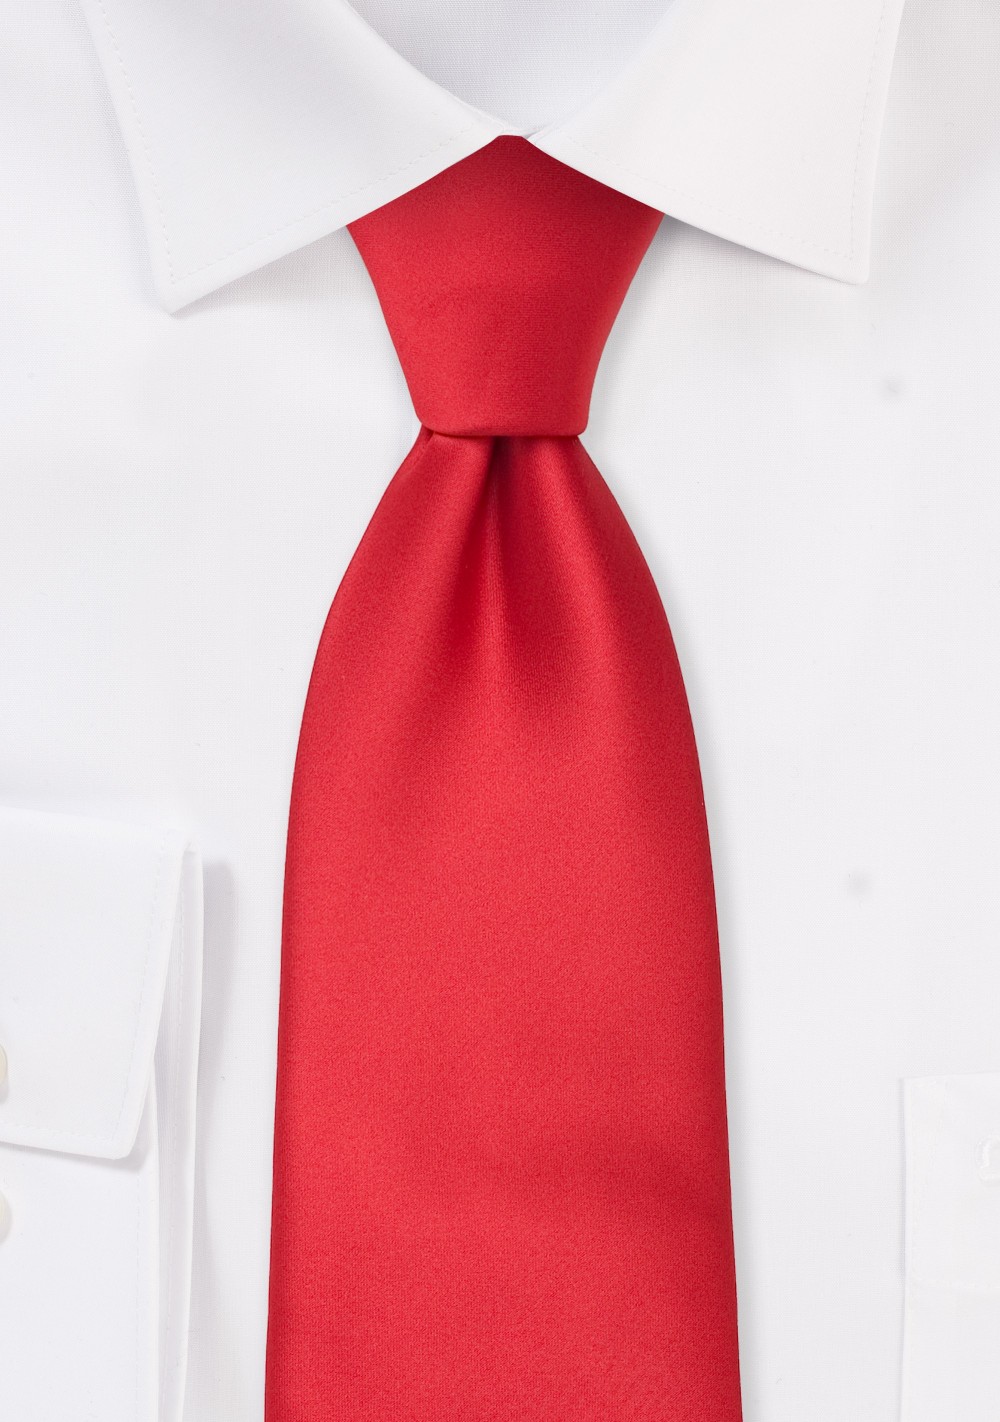 Bright Red Tie in XL